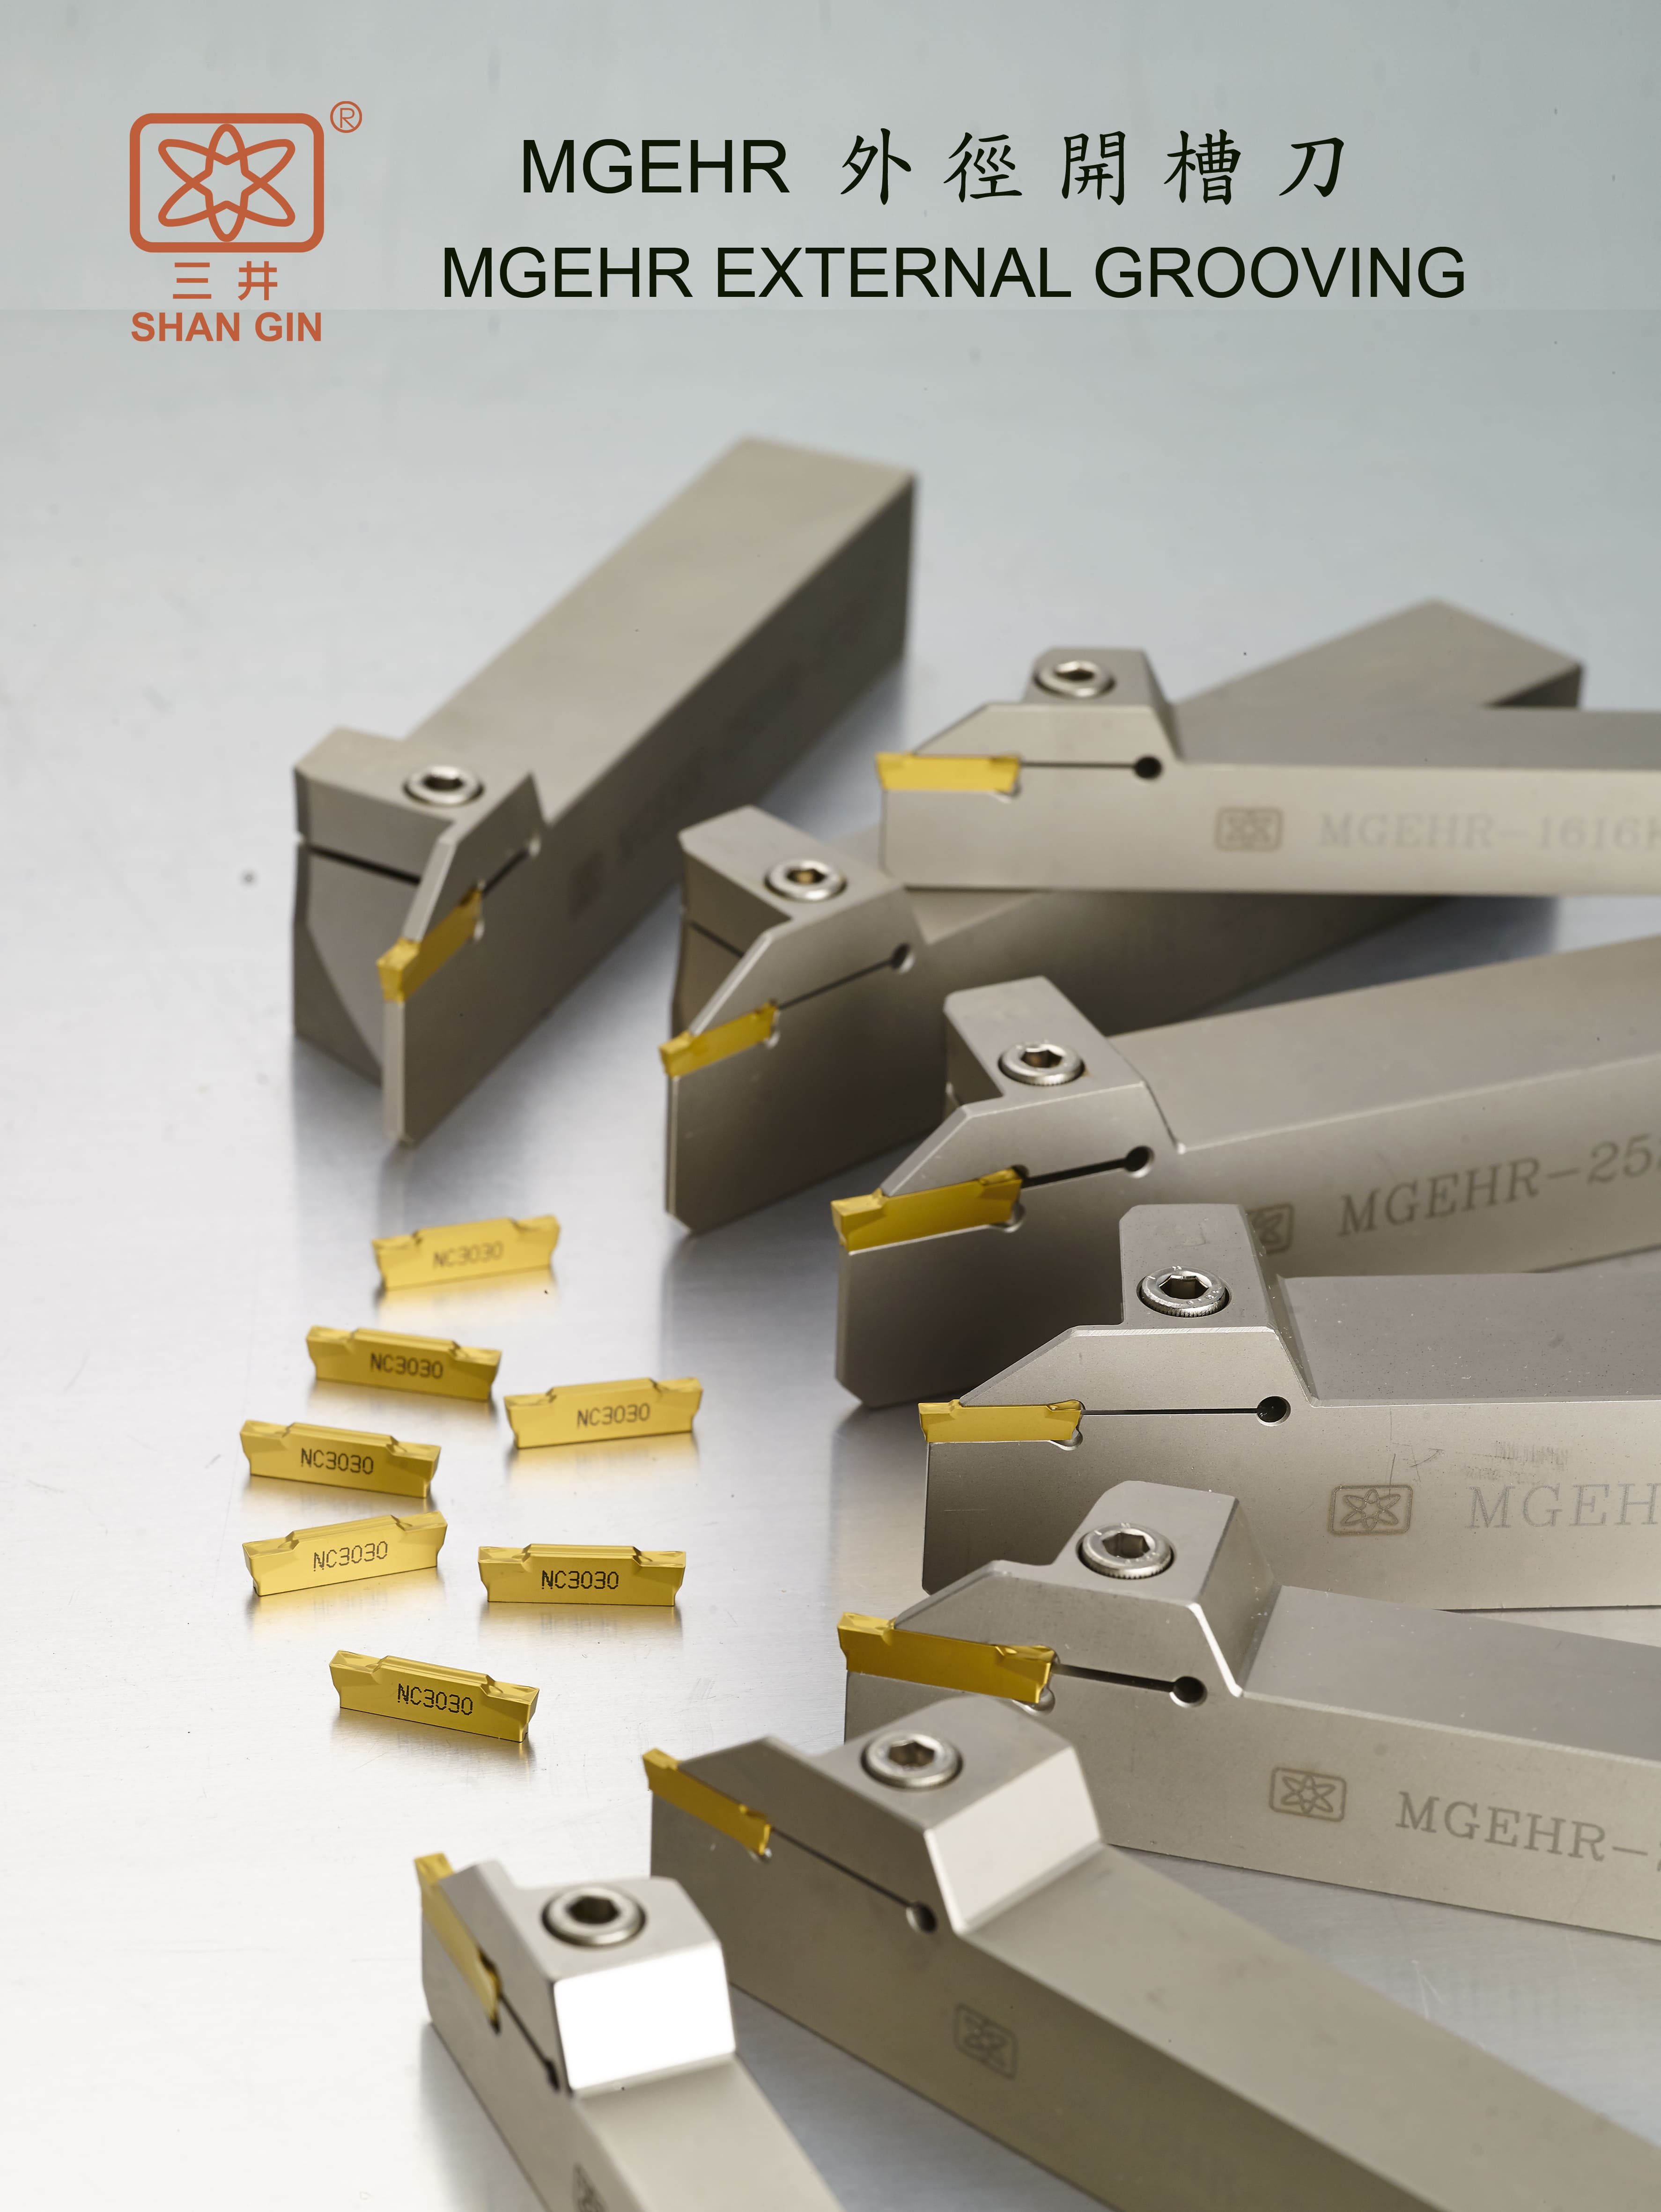 Products|MGEHR EXTERNAL GROOVING